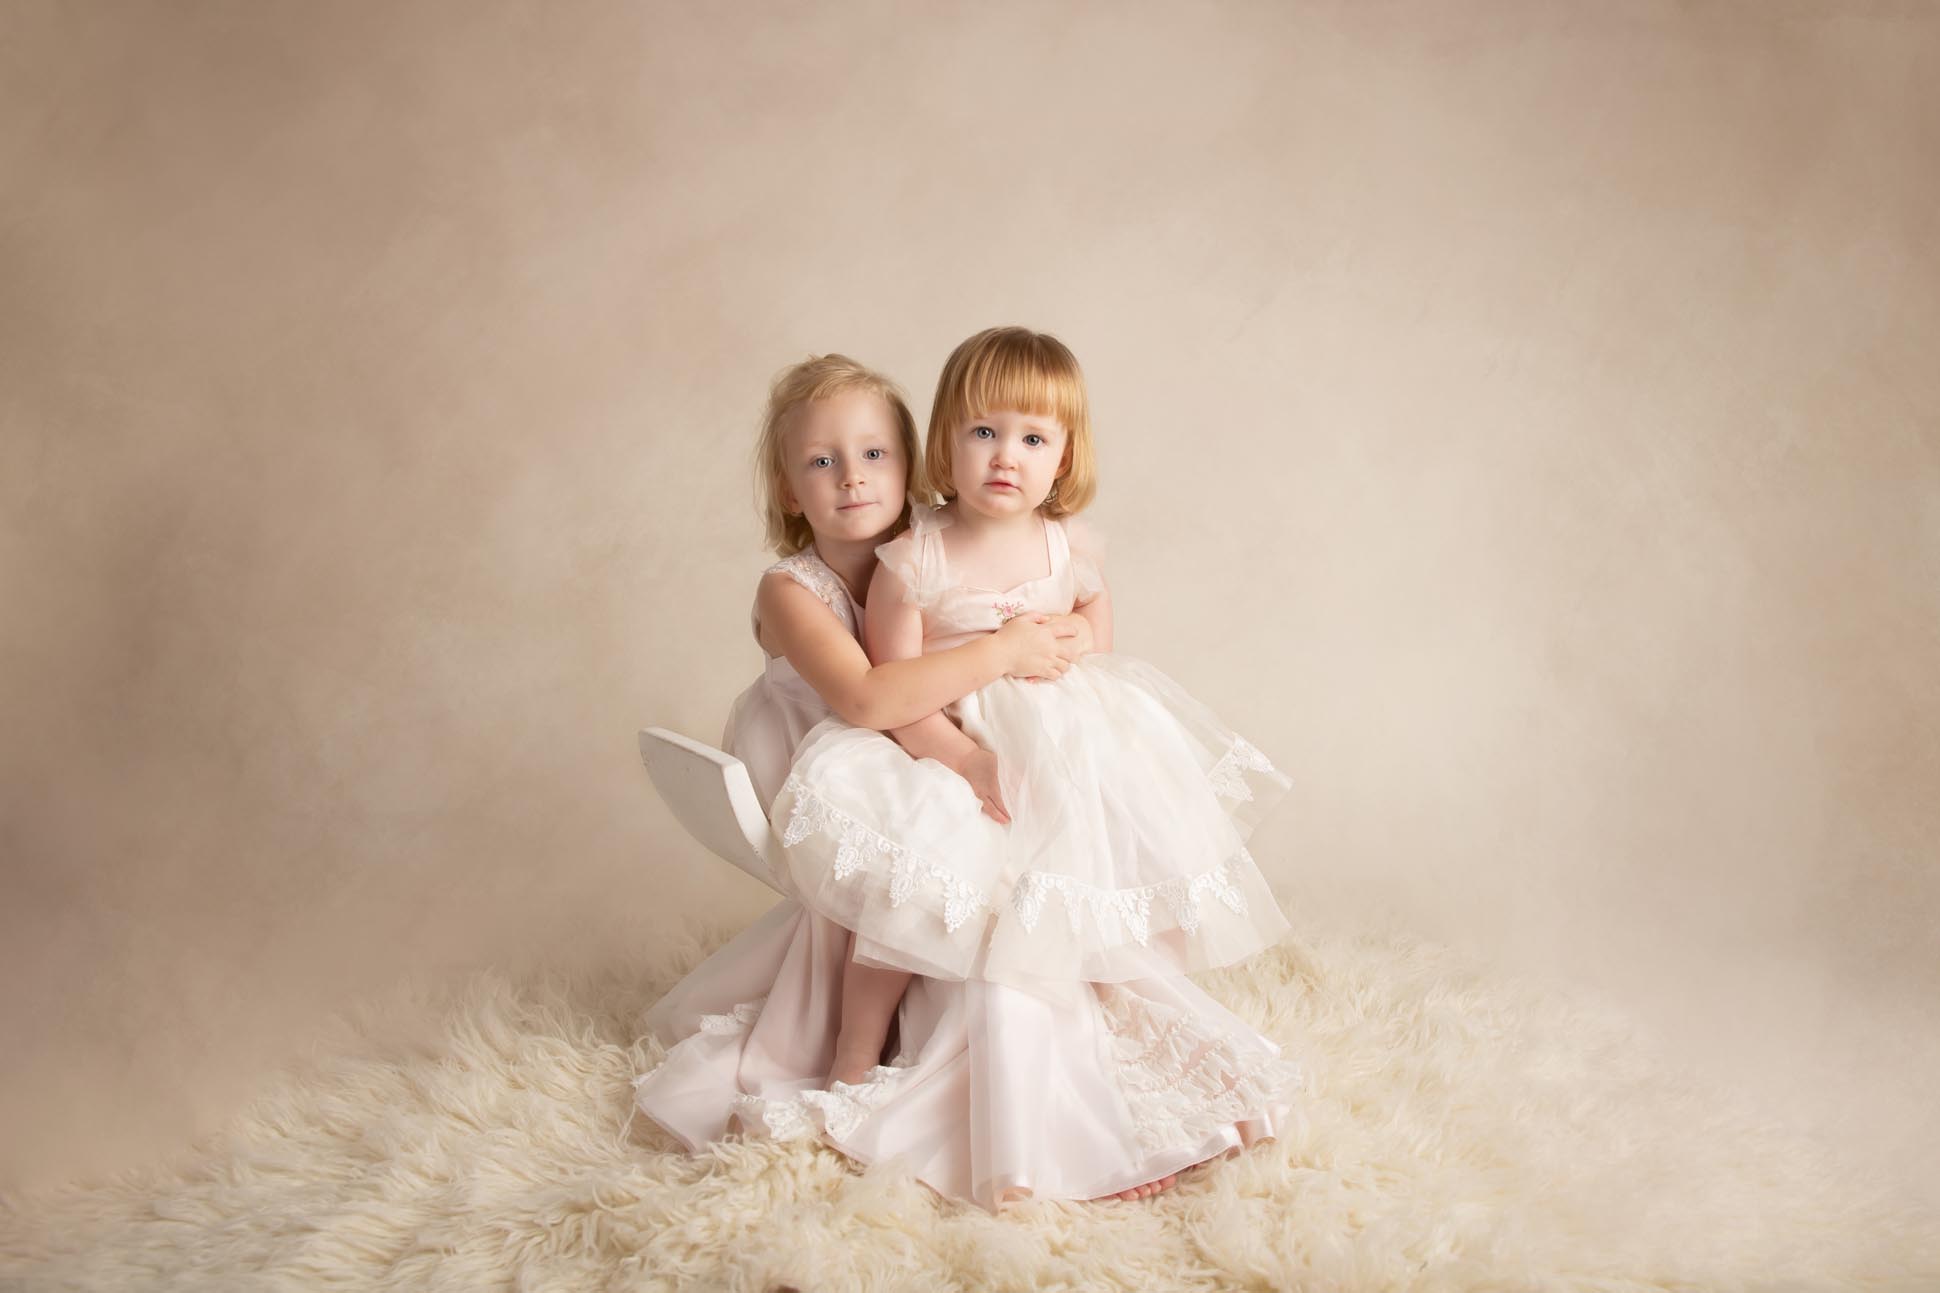 Dallas child photographer shares picture of two young sisters on cream background both wearing cream colored dresses